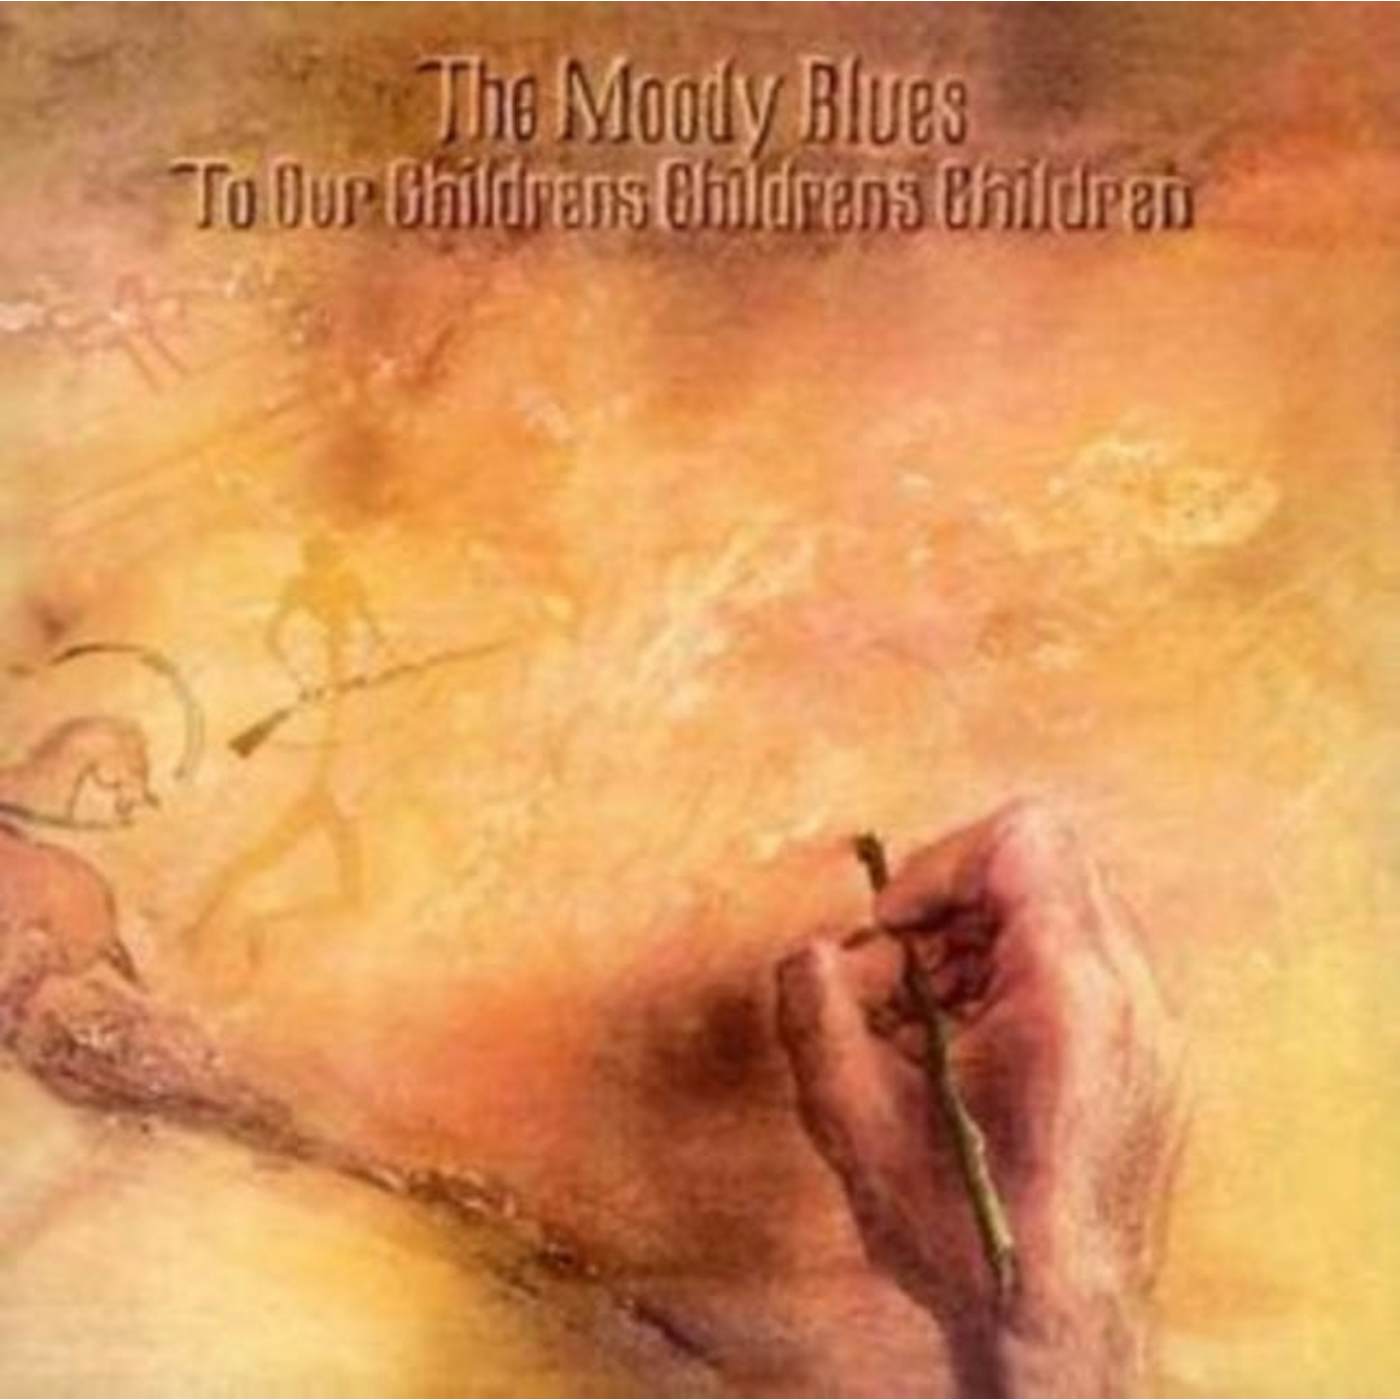 The Moody Blues CD - To Our Children's Children's Children